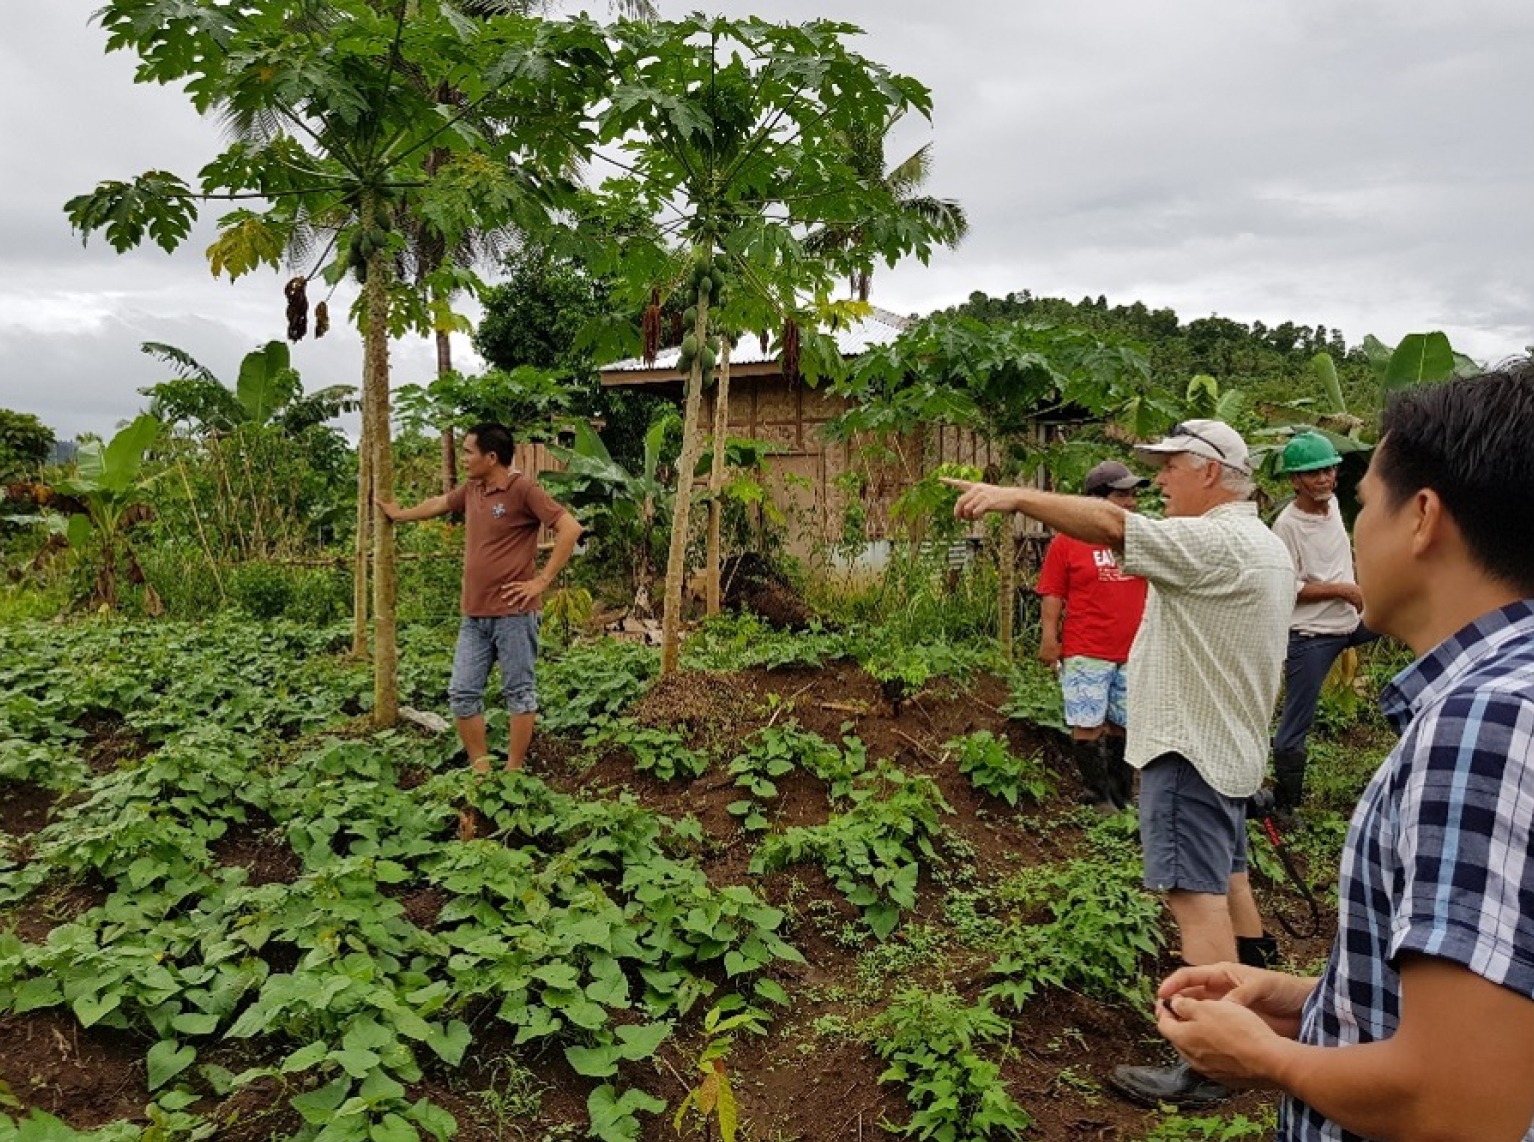 5 men standing in a cacao farm and looking where one man is pointing